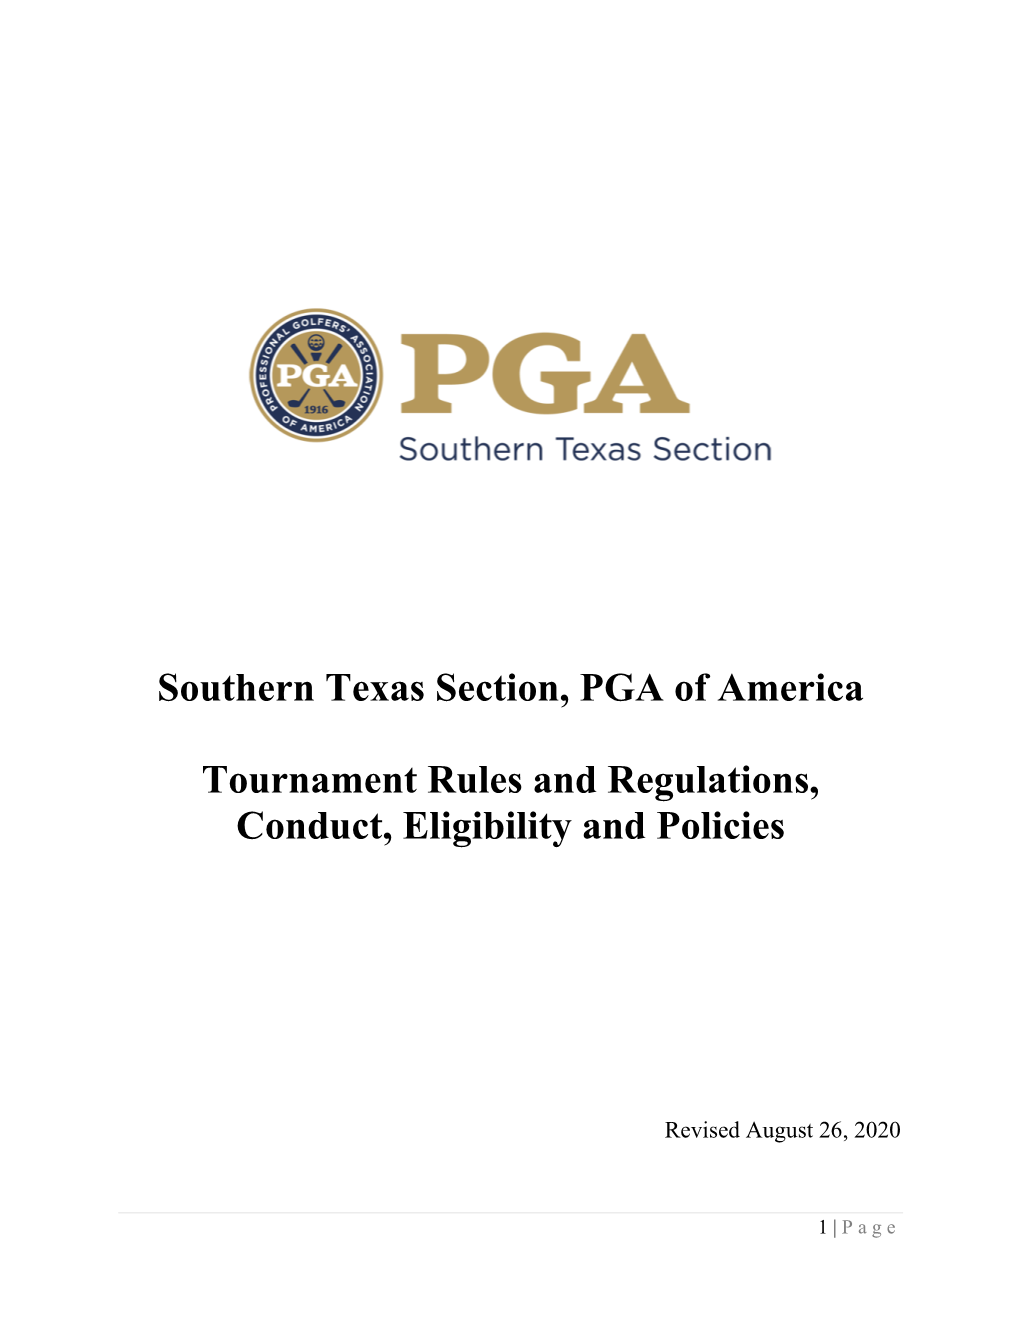 Southern Texas Section, PGA of America